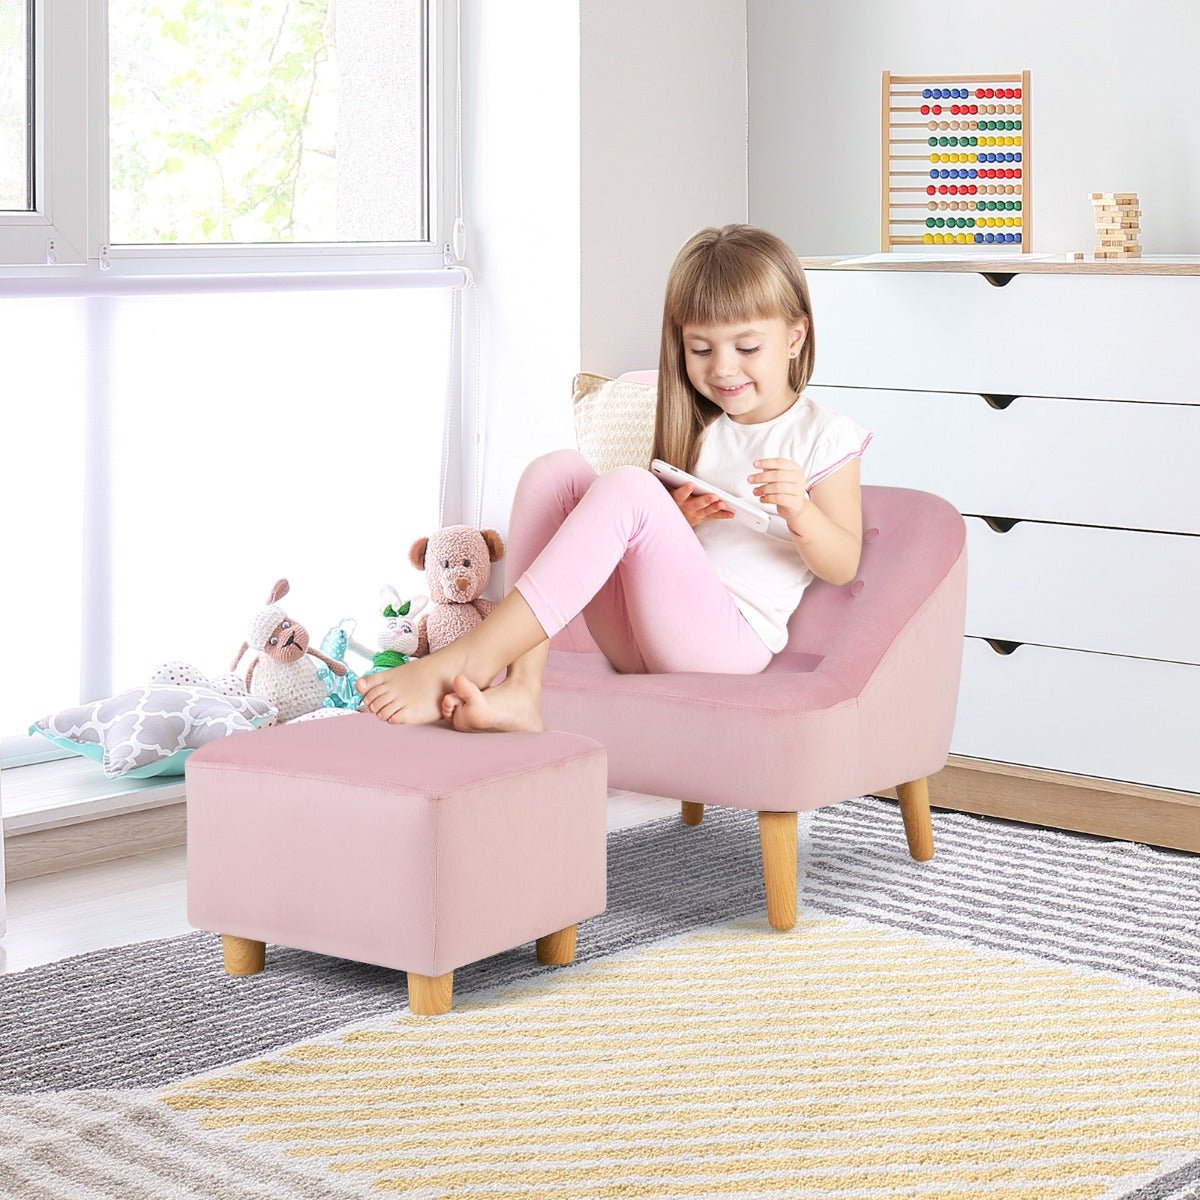 Children's Pink Sofa Chair & Stool - Ages 3-5, Comfortable Duo